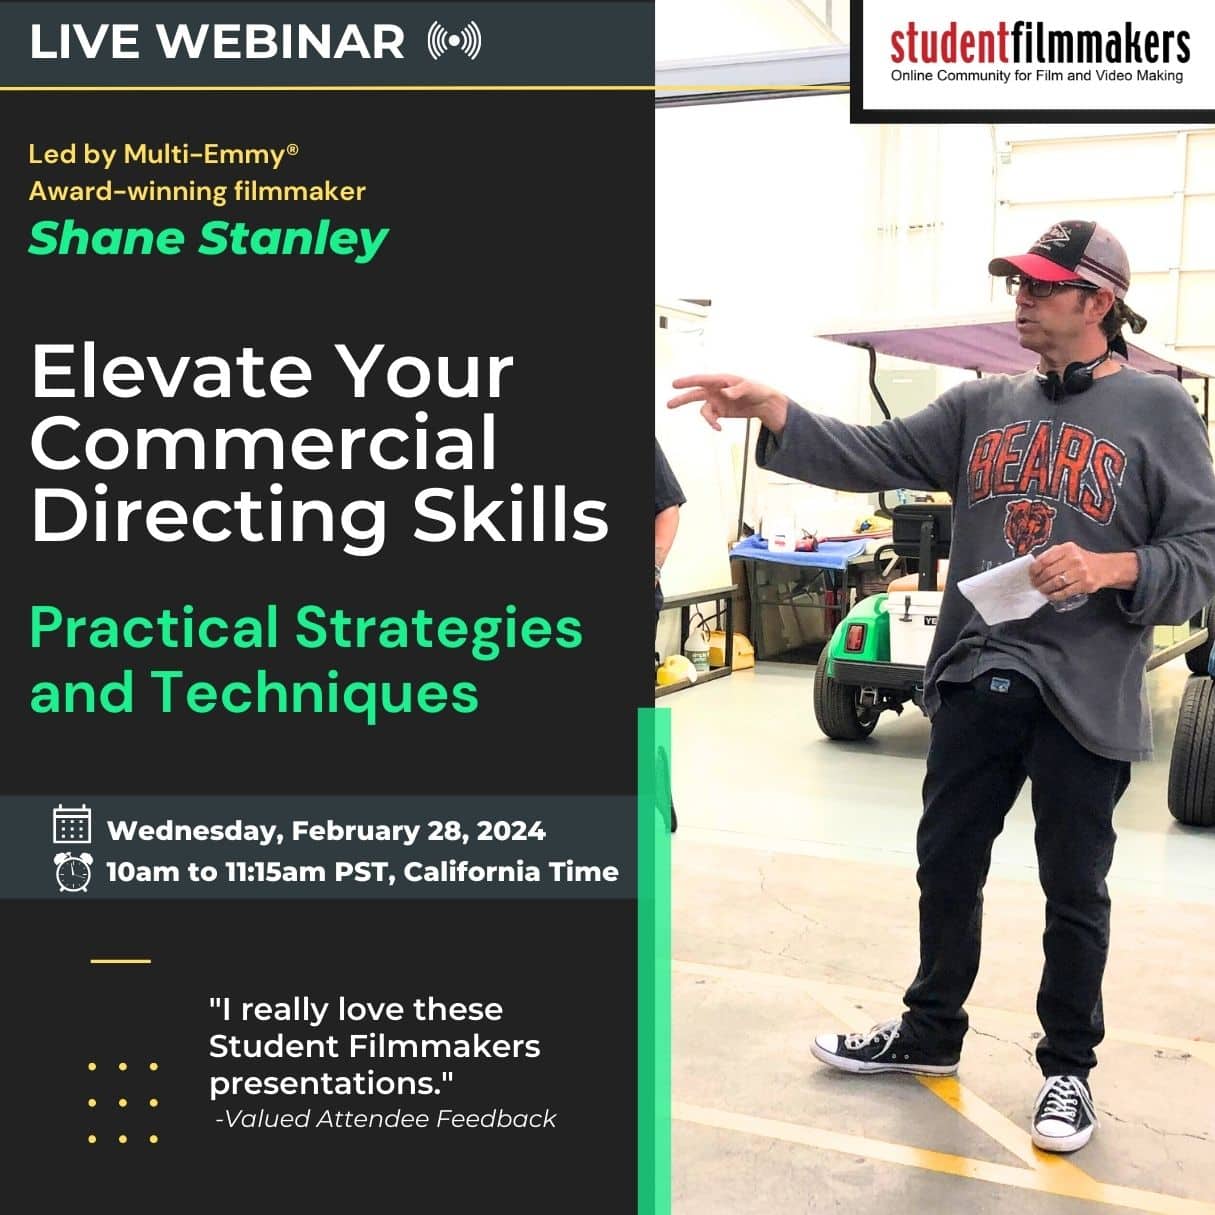 Live Webinar: “Elevate Your Commercial Directing Skills: Practical Strategies and Techniques” with Shane Stanley, Multi-Emmy® Award-Winning Filmmaker